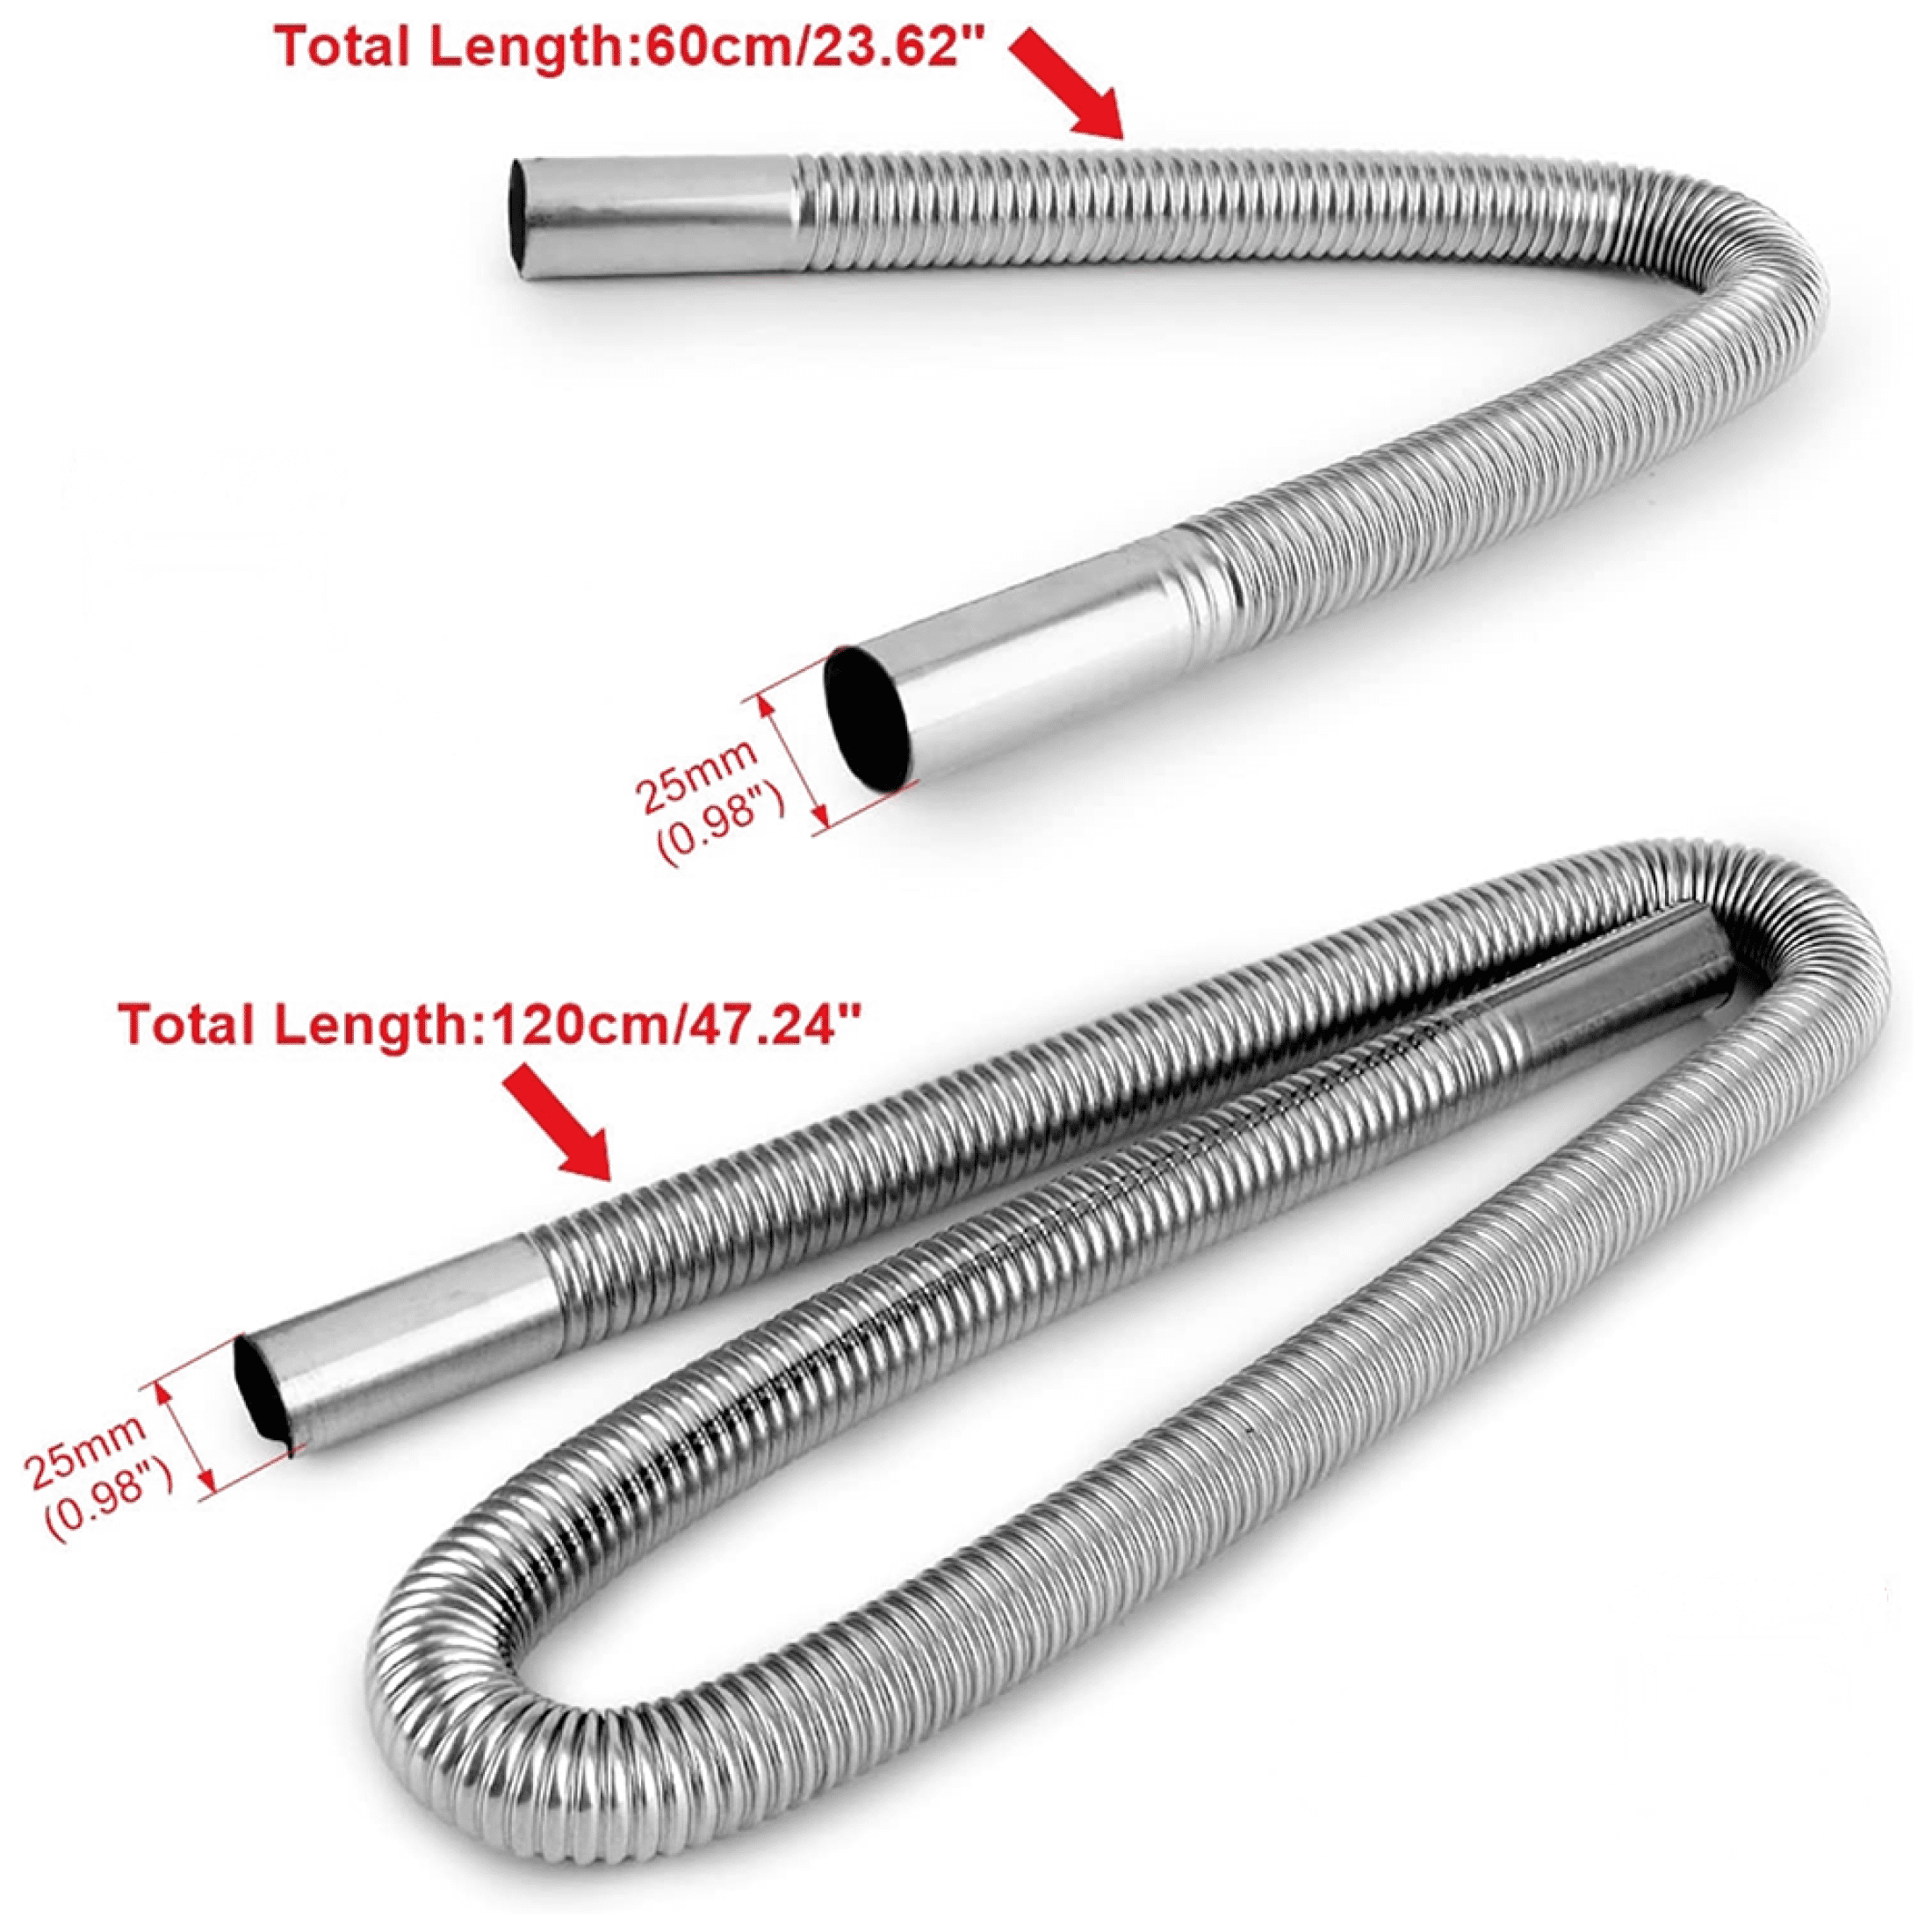 MoreChioce 24mm Inner Exhaust Pipe Stainless Steel Parking Air Heater  Generator Flex Exhaust Extension Pipe Parking Air Heater Fuel Tank Gas Vent  Hose